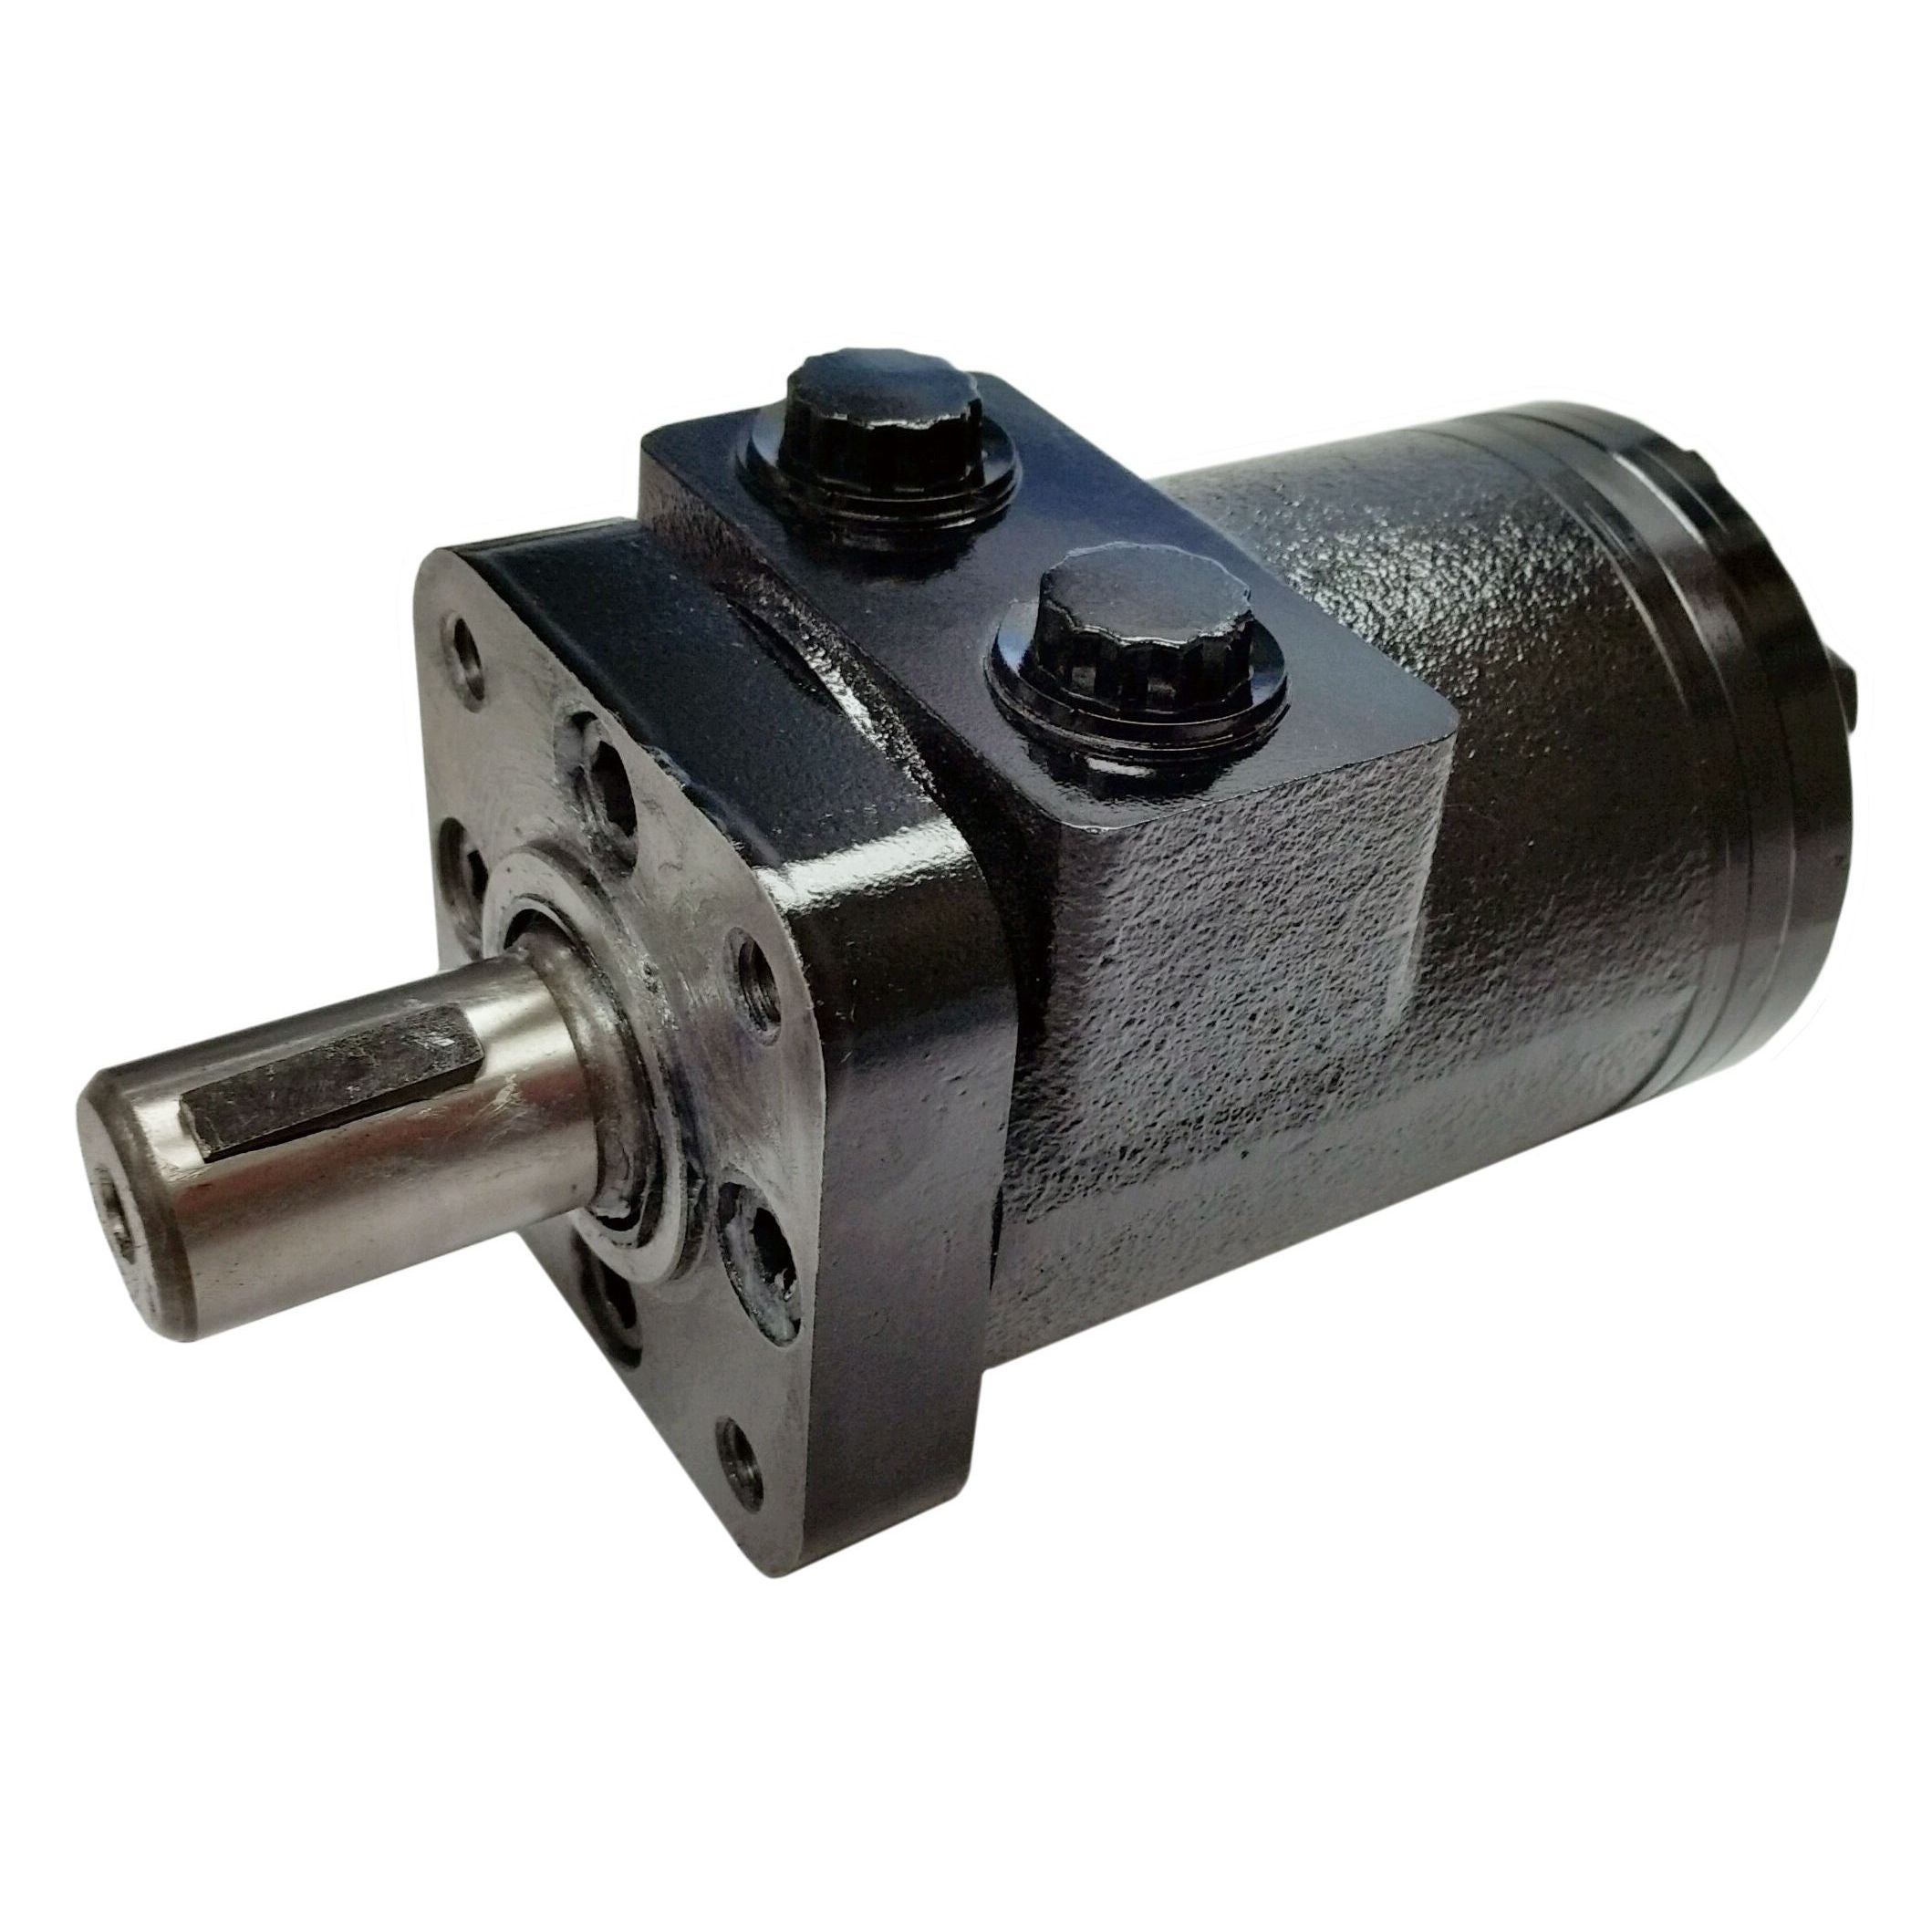 BMPH-400-H4-S-P : Dynamic LSHT Motor, 390cc, 155RPM, 3186in-lb, 1450psi Differential, 15.85GPM, SAE A 4-Bolt Mount, 6-Tooth Shaft, Side Ported, 1/2" NPT